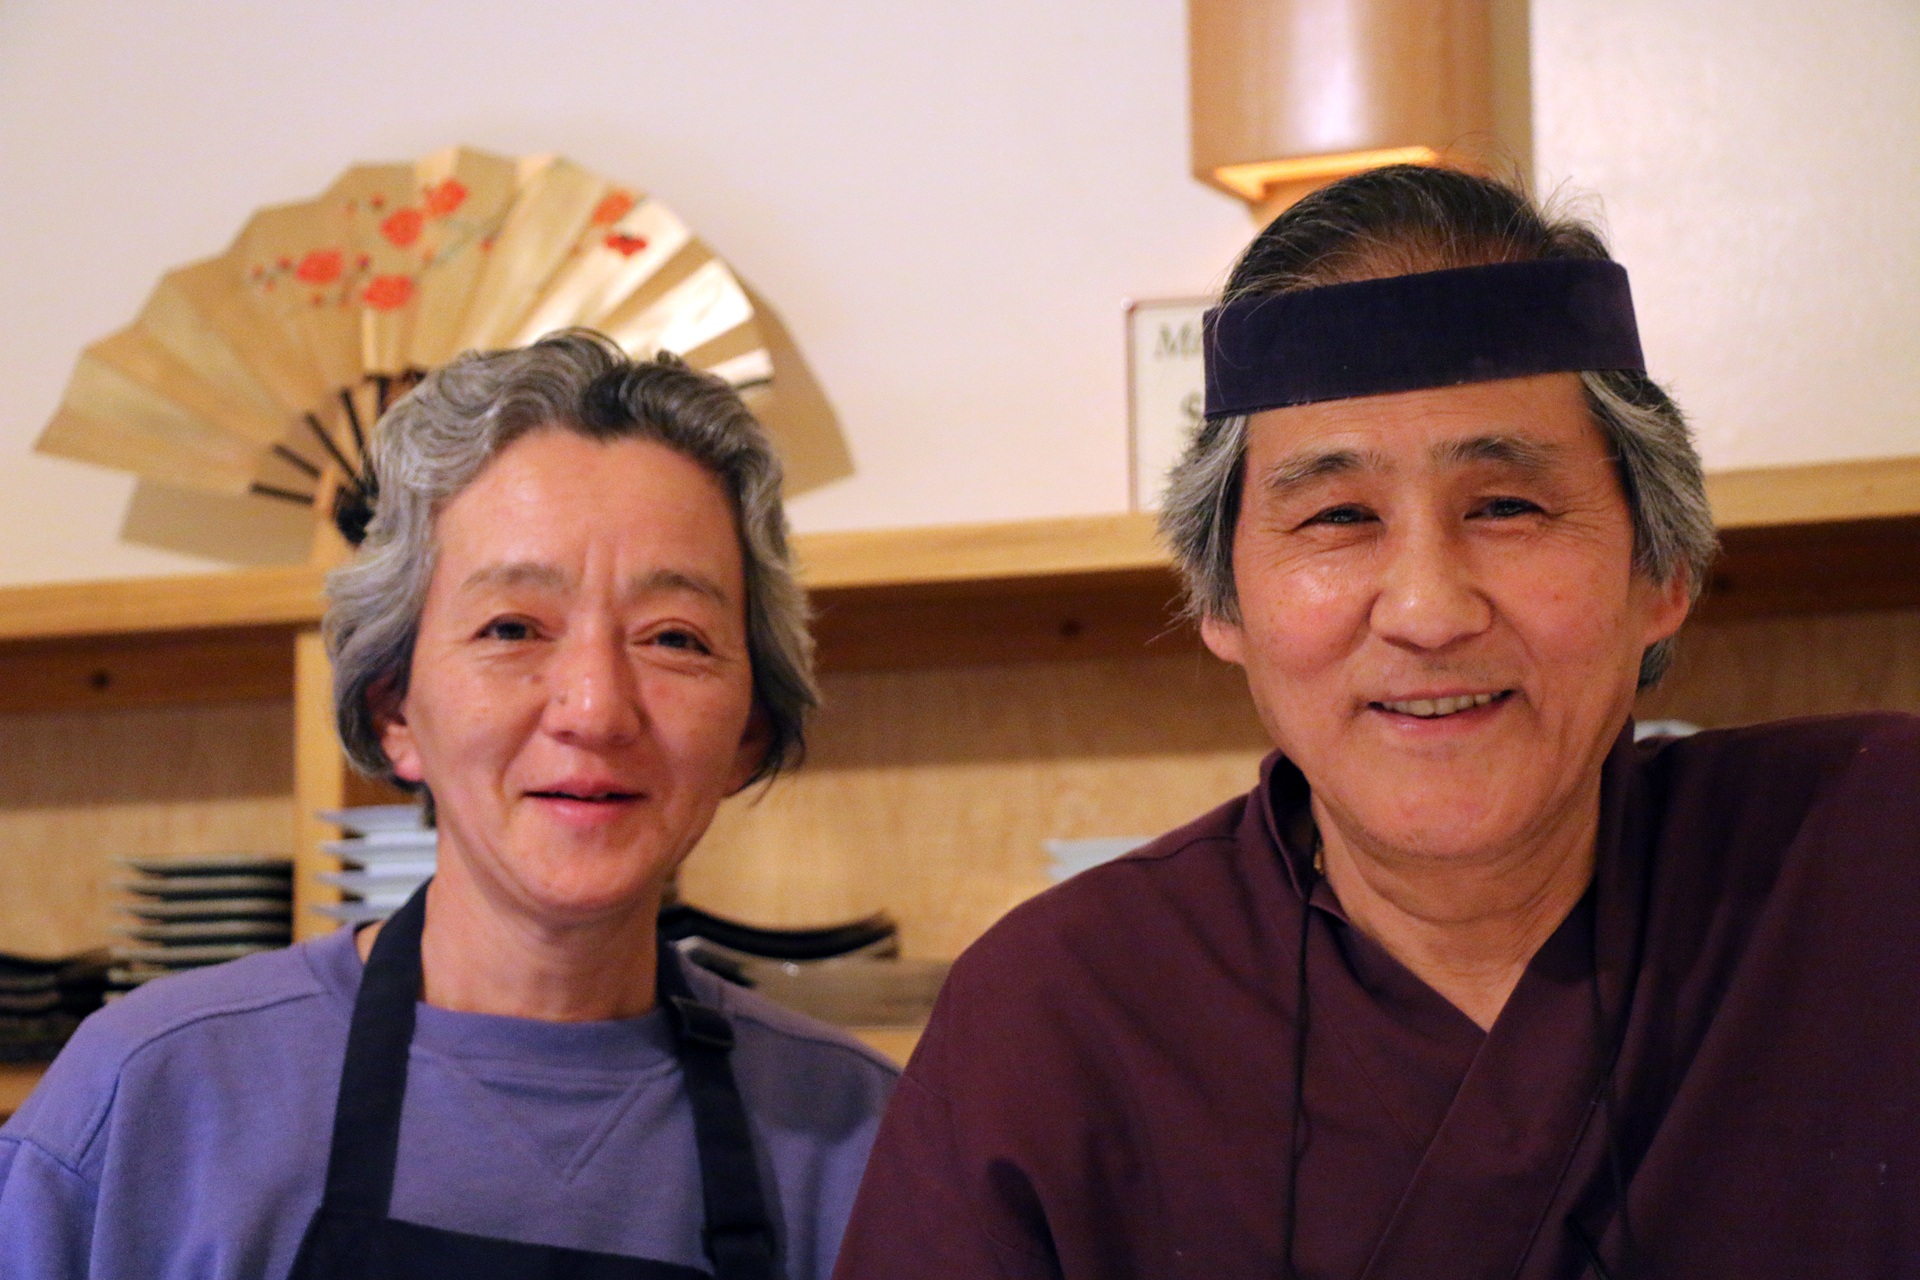 Aki-san and his wife, in business together since 1983.